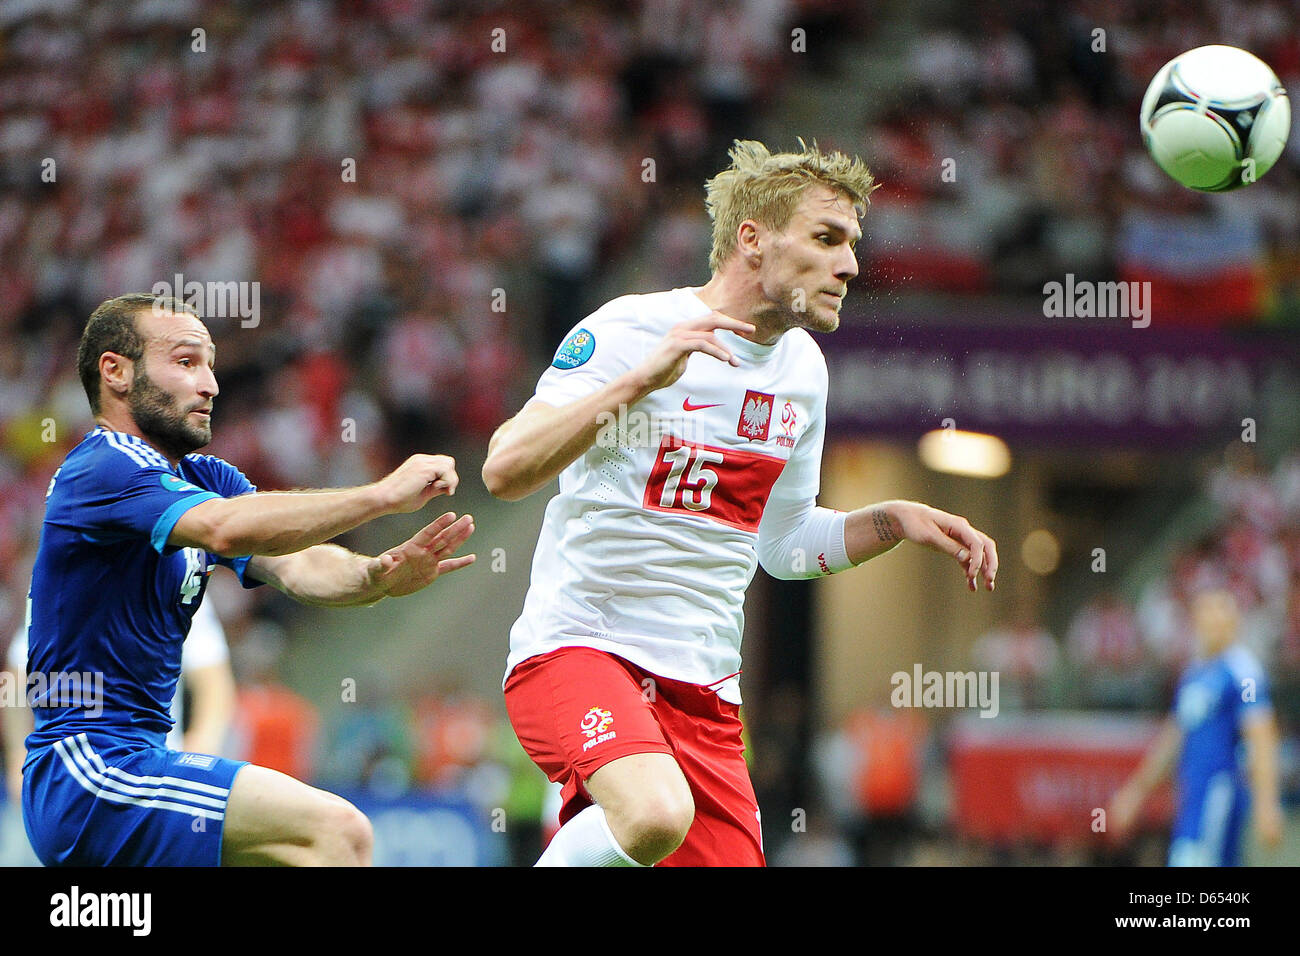 Poland's Damien Perquis (R) vies for the ball with Greece's Dimitris Salpingidis during the UEFA Euro 2012 match between Poland and Greece at the national stadium in Warsaw, Poland, 08 June 2012. Photo: Pressfocus / Revierfoto Stock Photo